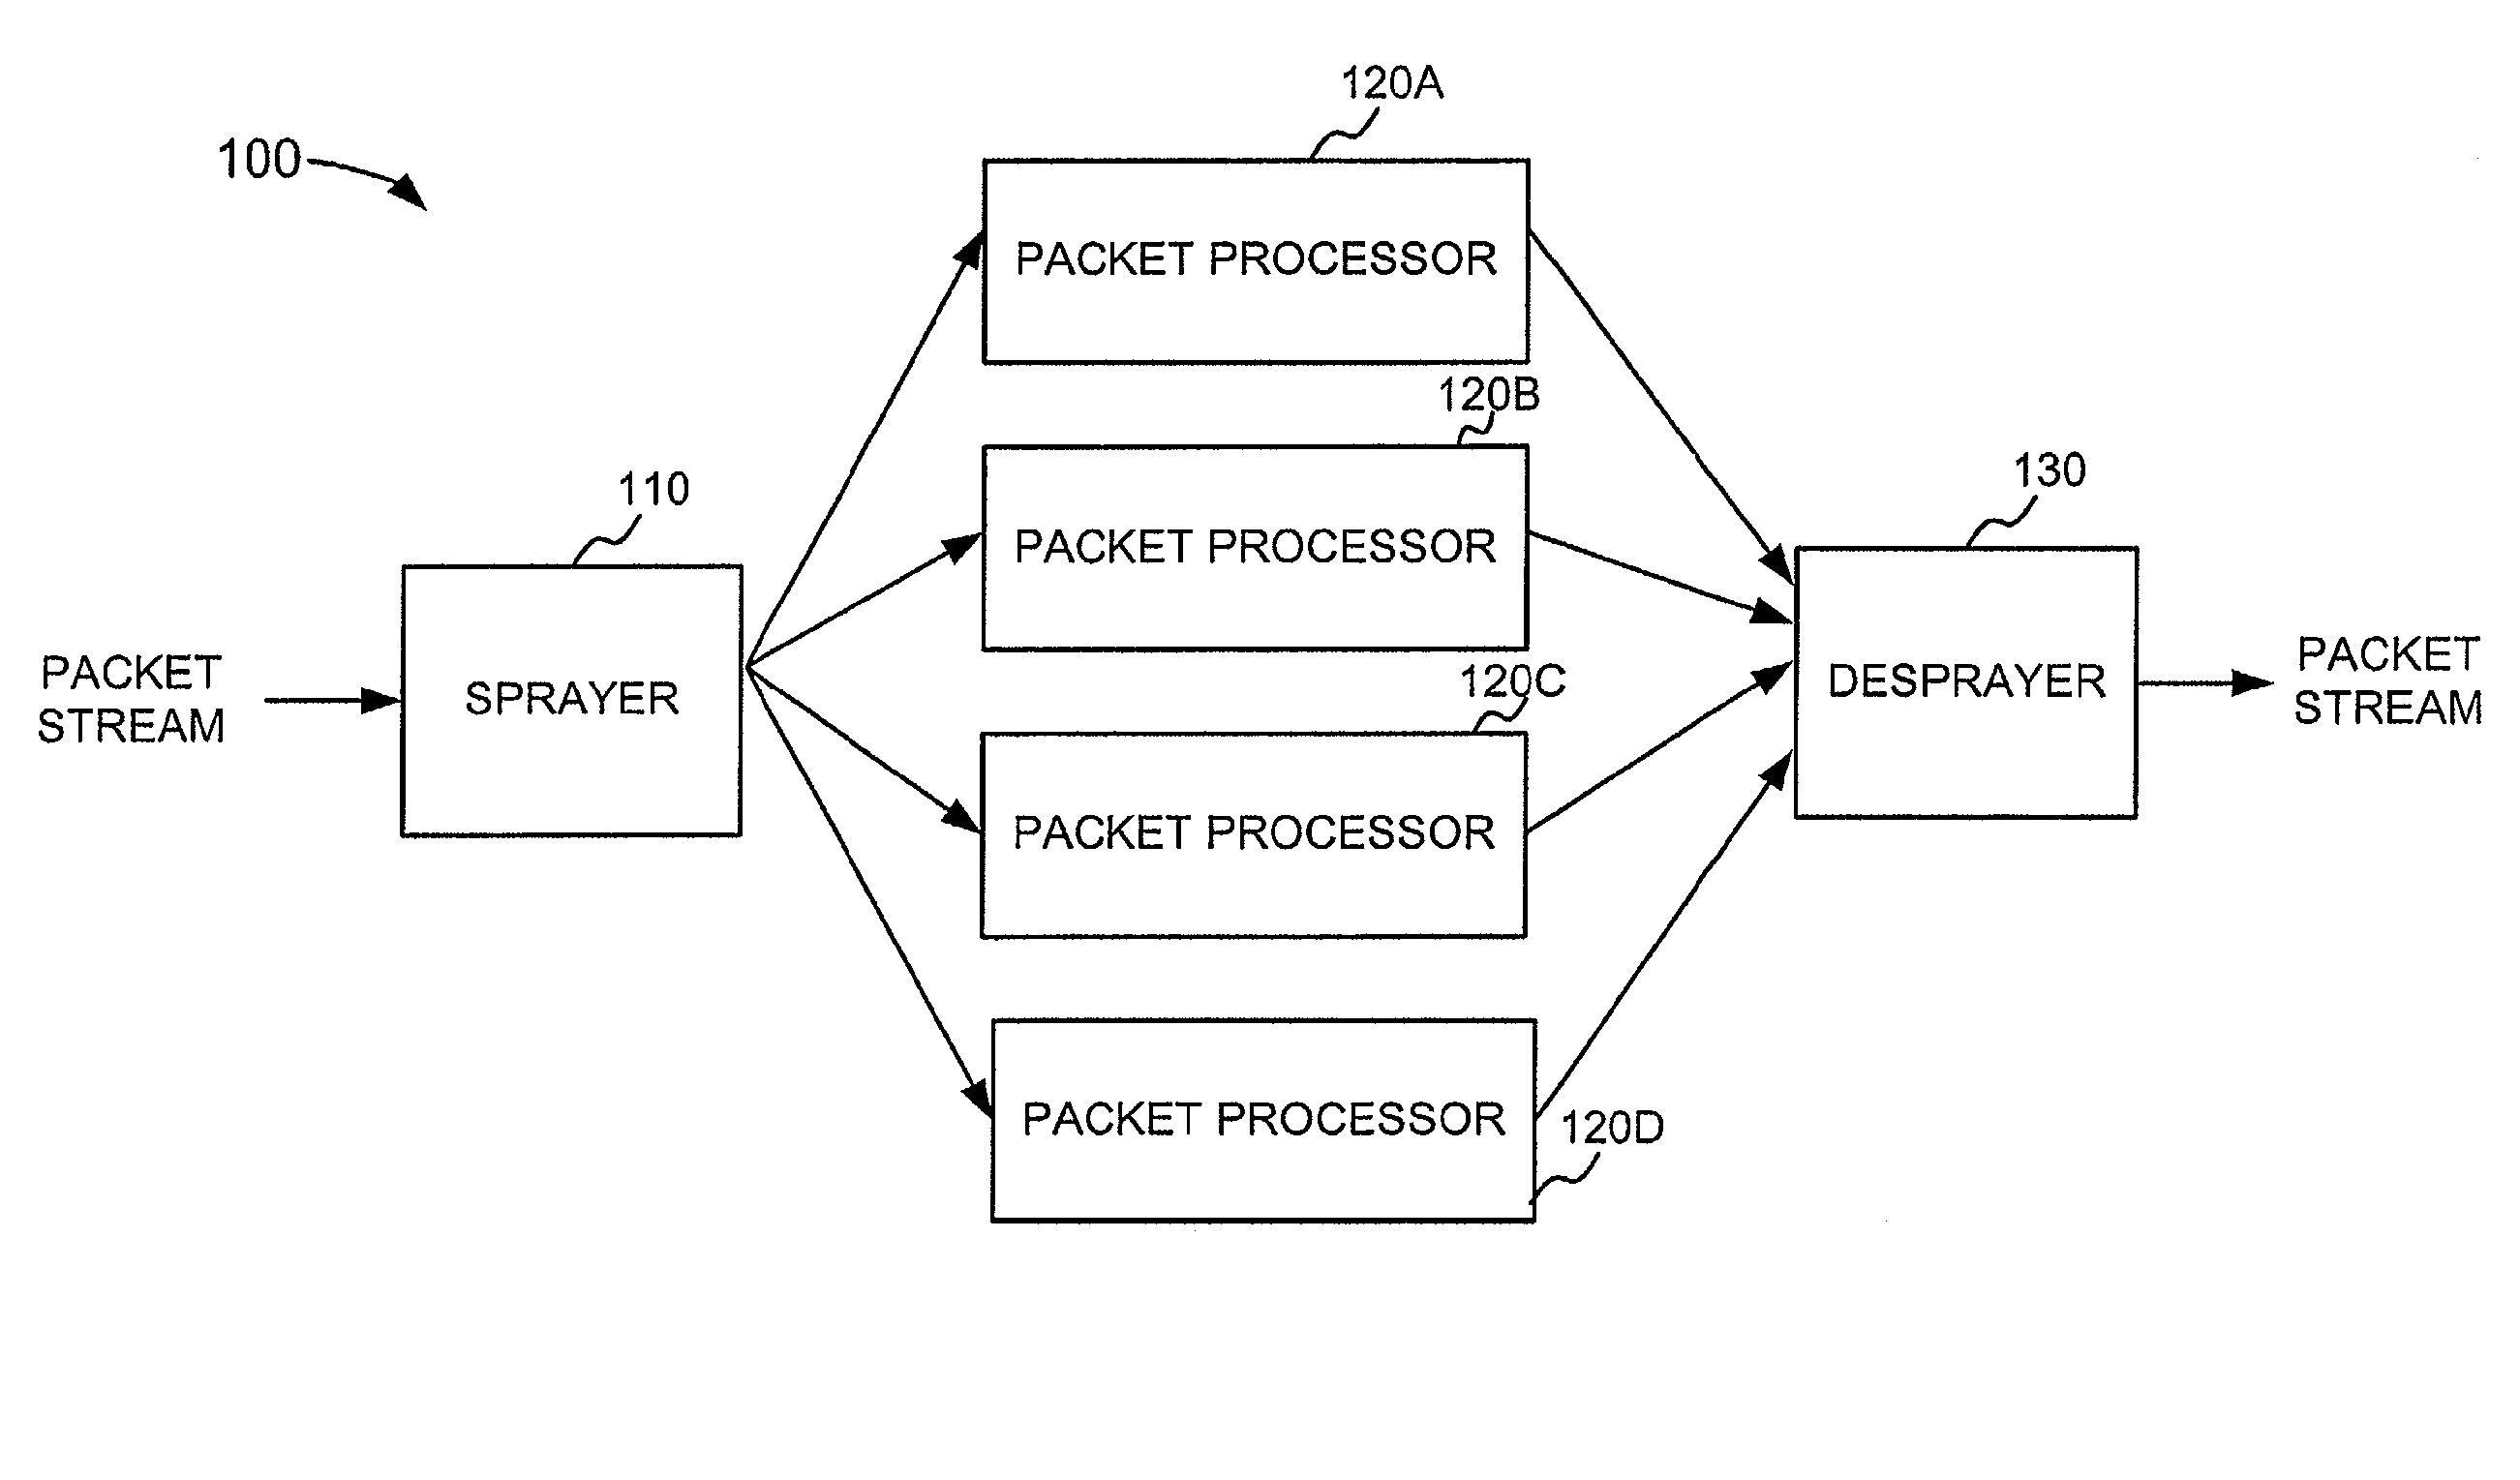 Packet spraying for load balancing across multiple packet processors